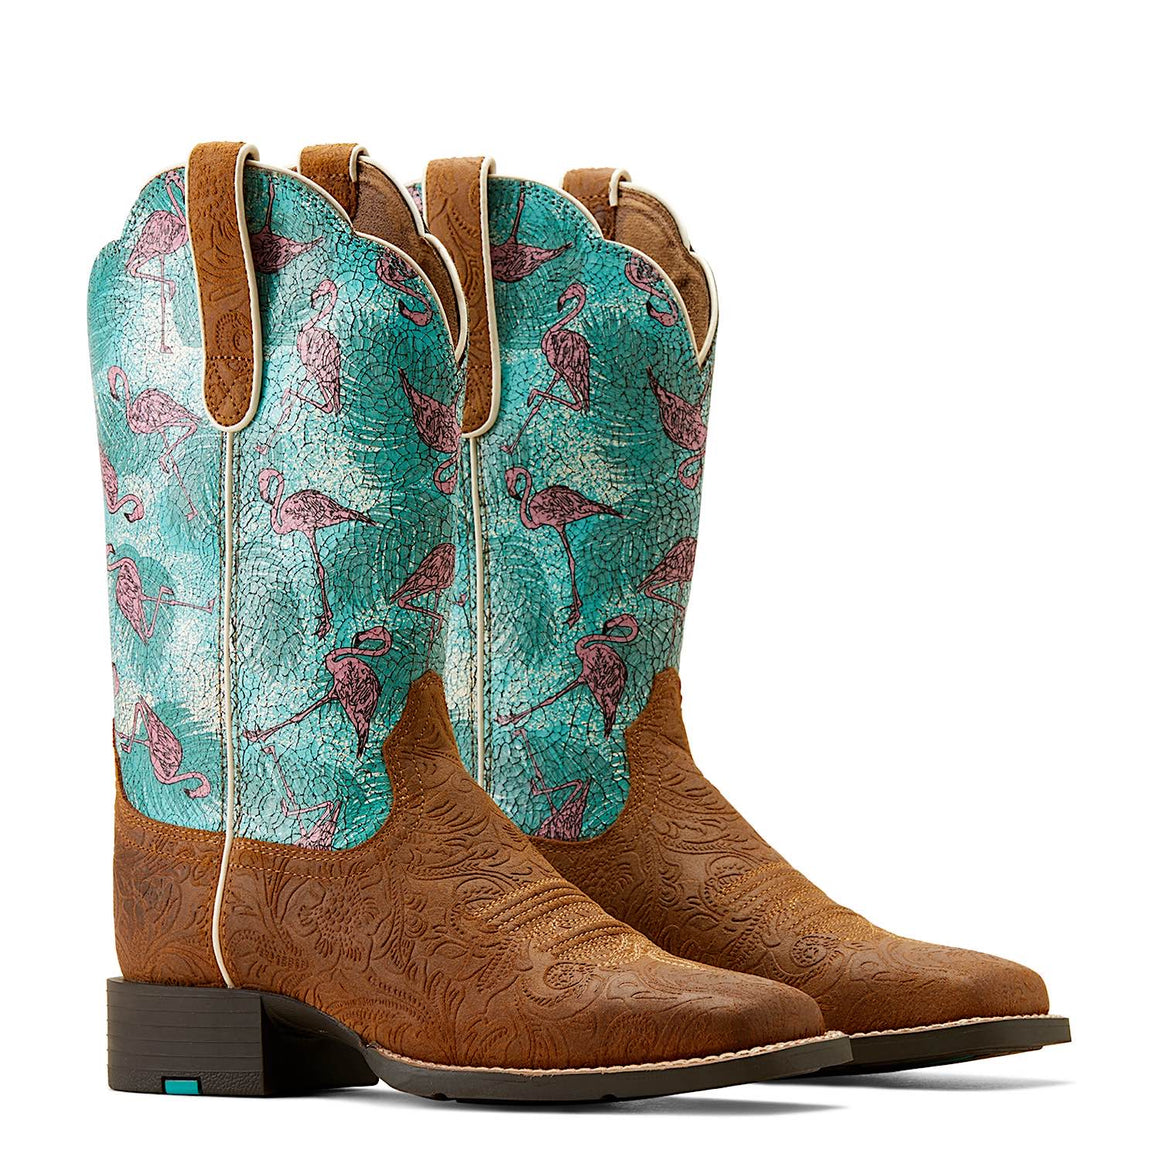 Ariat Womens Round Up Wide Square Toe Boot Embossed Chestnut/Flock O Flamingos